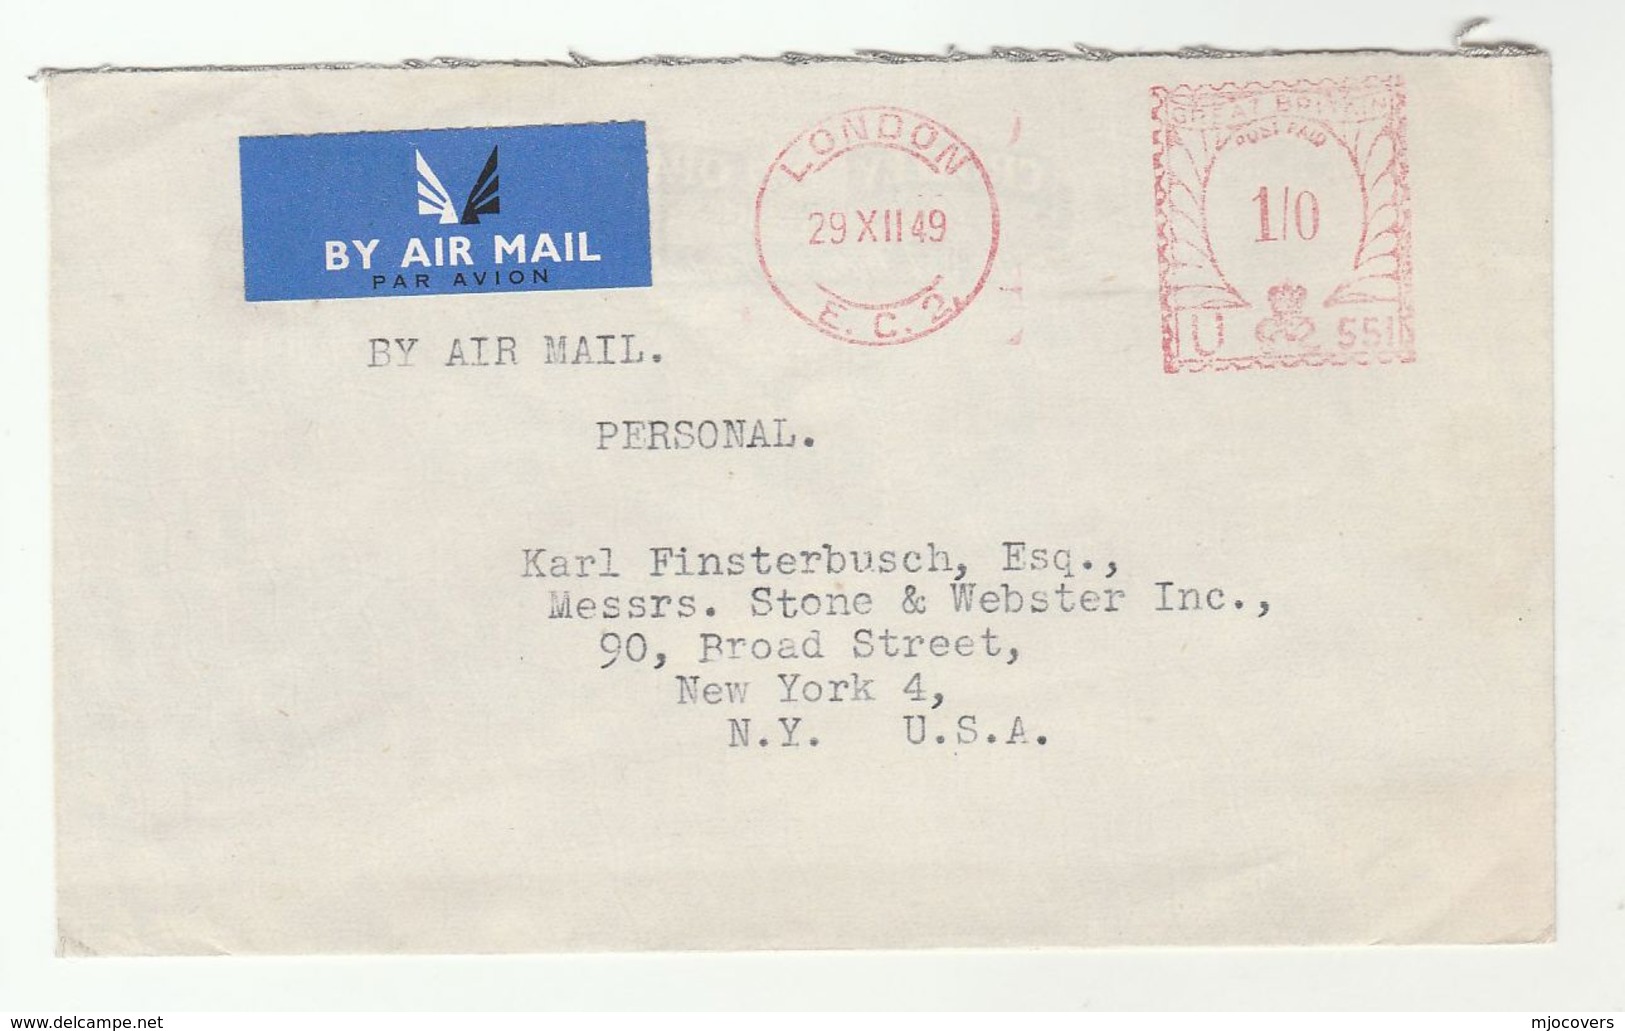 1949 Air Mail  GB COVER  METER Stamps  1/0 U551 London EC3 To USA Airmail Label - Covers & Documents